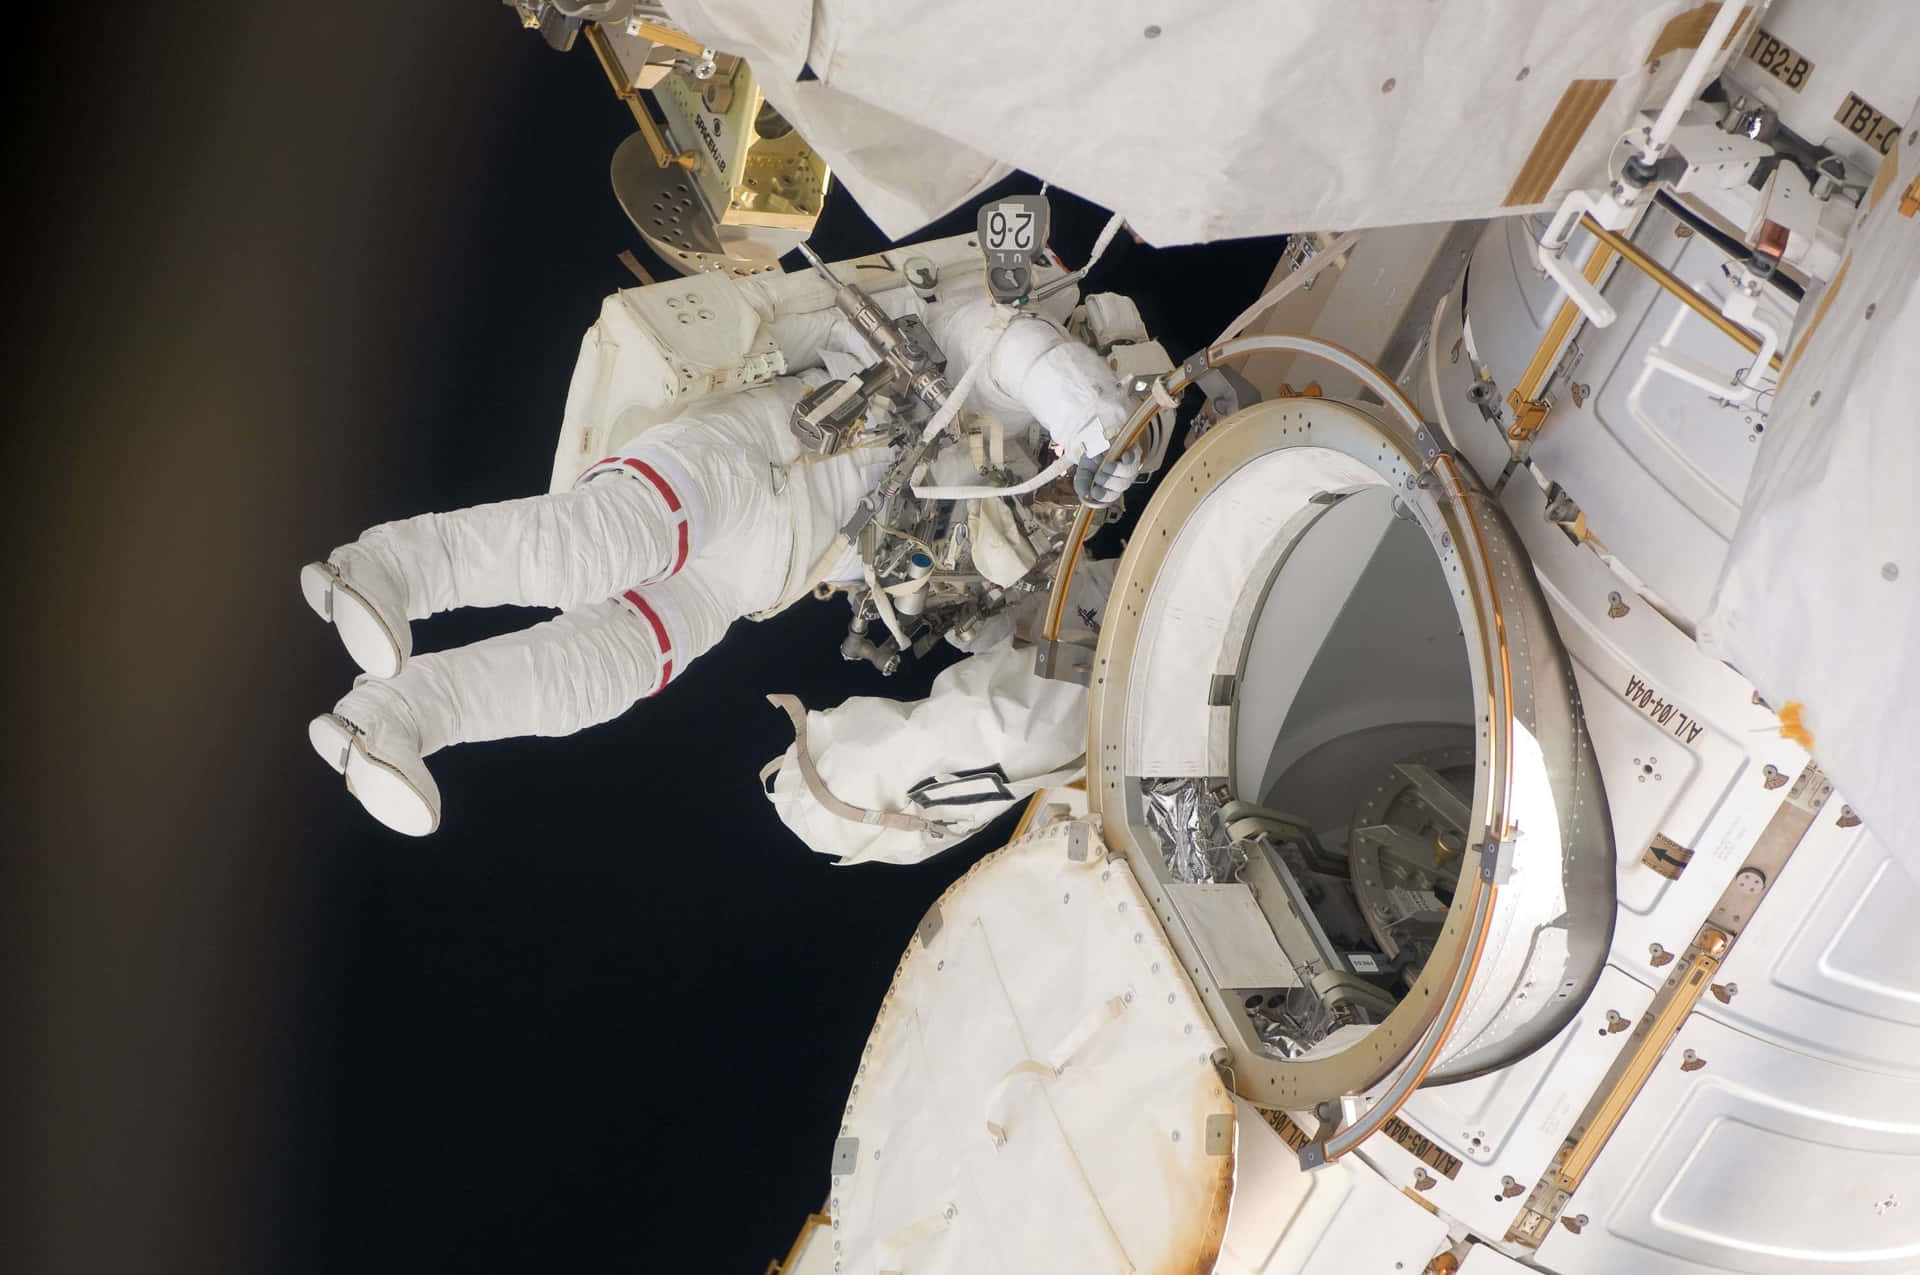 Astronaut performing a spacewalk on a space mission Wallpaper